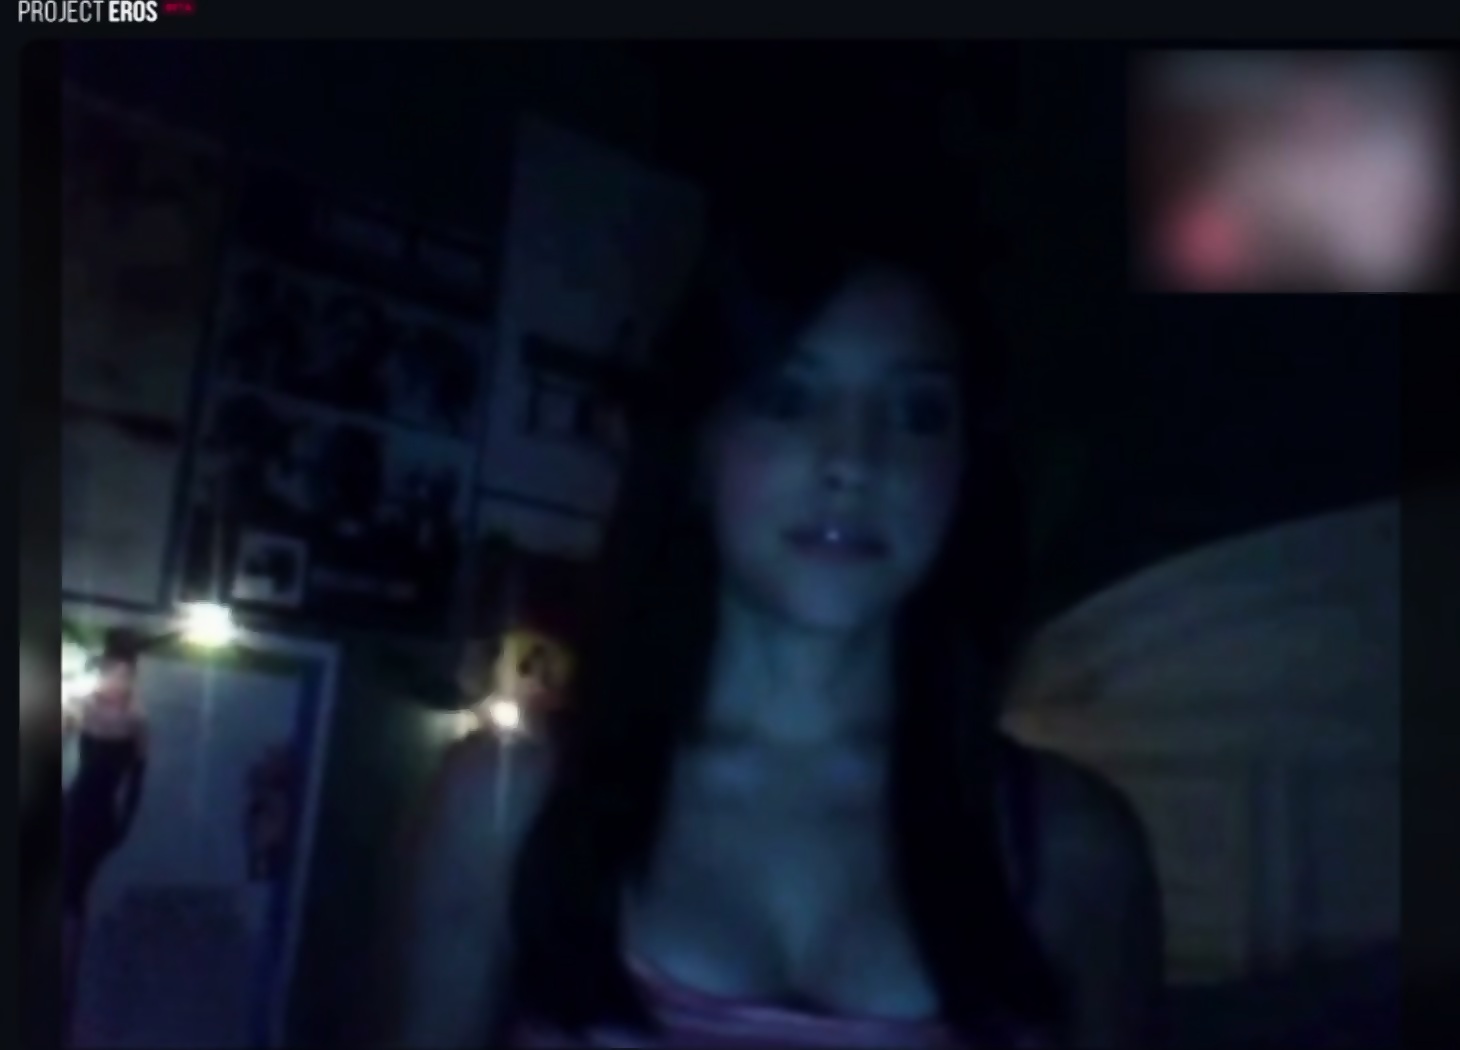 1460px x 1050px - Cute Teen On Webcam Masturbating Omegle Sex Chat On Project Eros - EPORNER